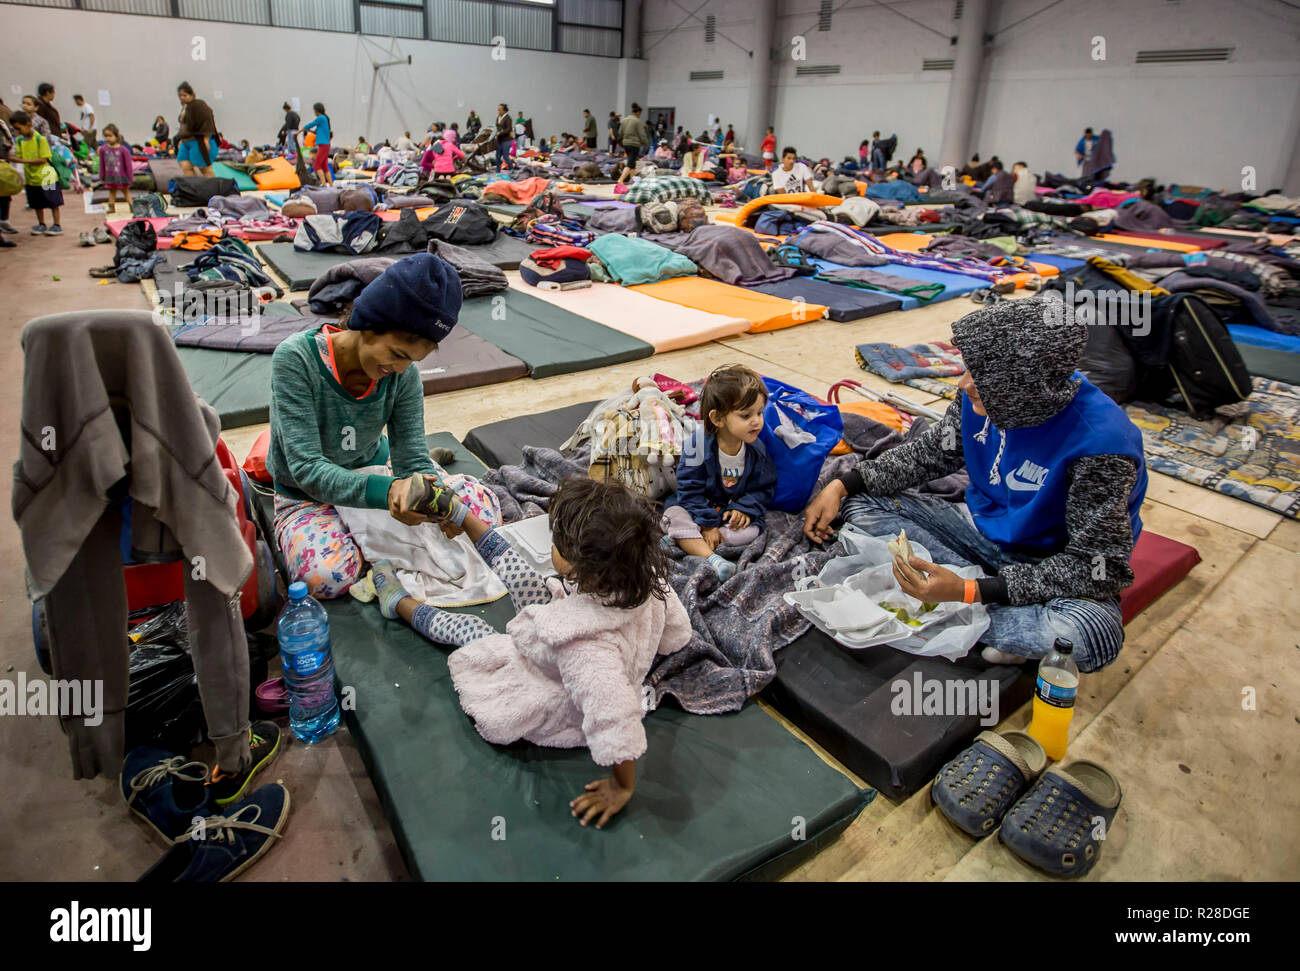 Tijuana, Mexico. 17th Nov, 2018. Migrants rest at the Benito Juárez sports complex in Tijuana. Between 2000 and 2500 migrants are accommodated there. The hostels in Tijuana are full - authorities estimated that a total of about 9600 people will arrive in the border city with several so-called migrant caravans. They all have a common goal: The United States. People flee violence and unemployment in their home countries. Credit: Omar Martinez/dpa/Alamy Live News Stock Photo